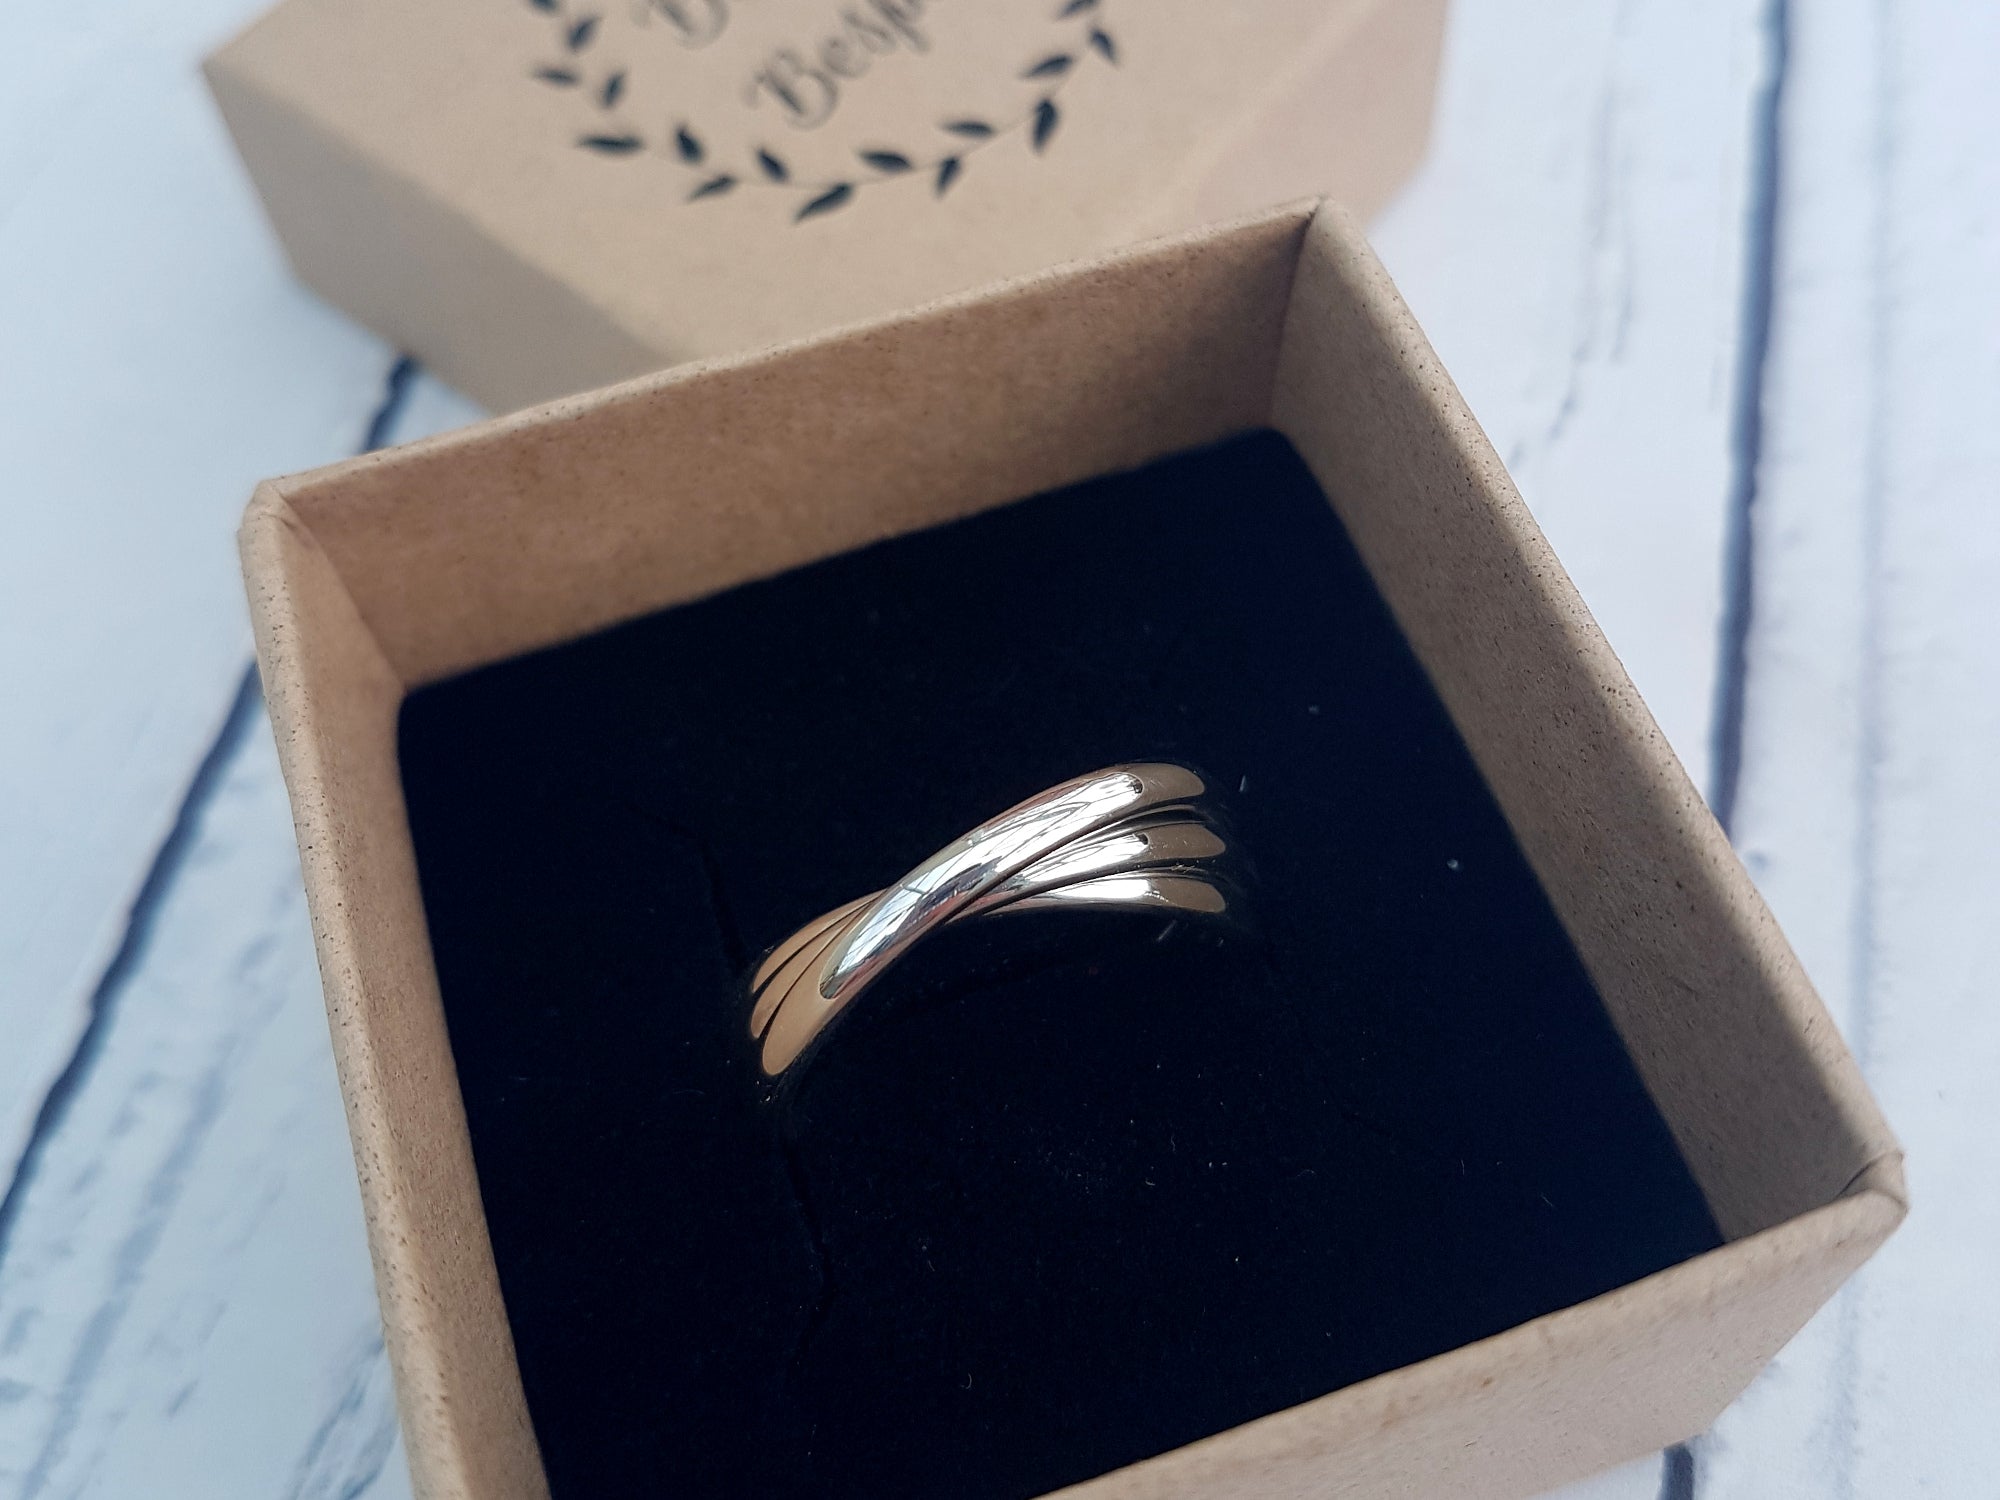 Silver Trinity Rings - 3mm Wide